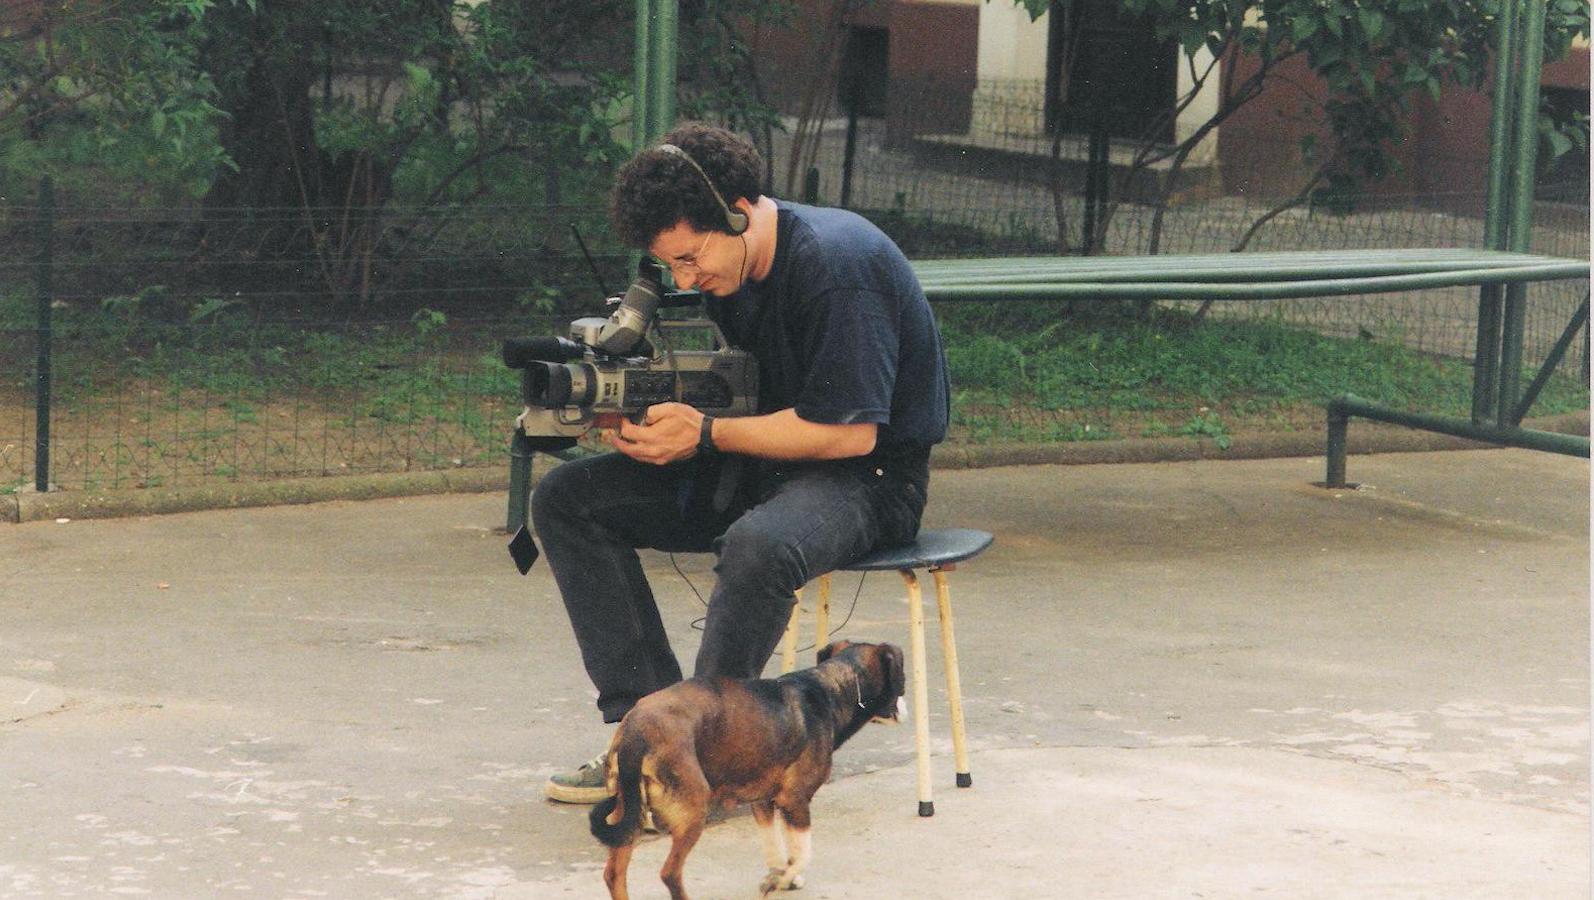 A man sitting in a park looks through a video camera viewfinder while a dog walks by.